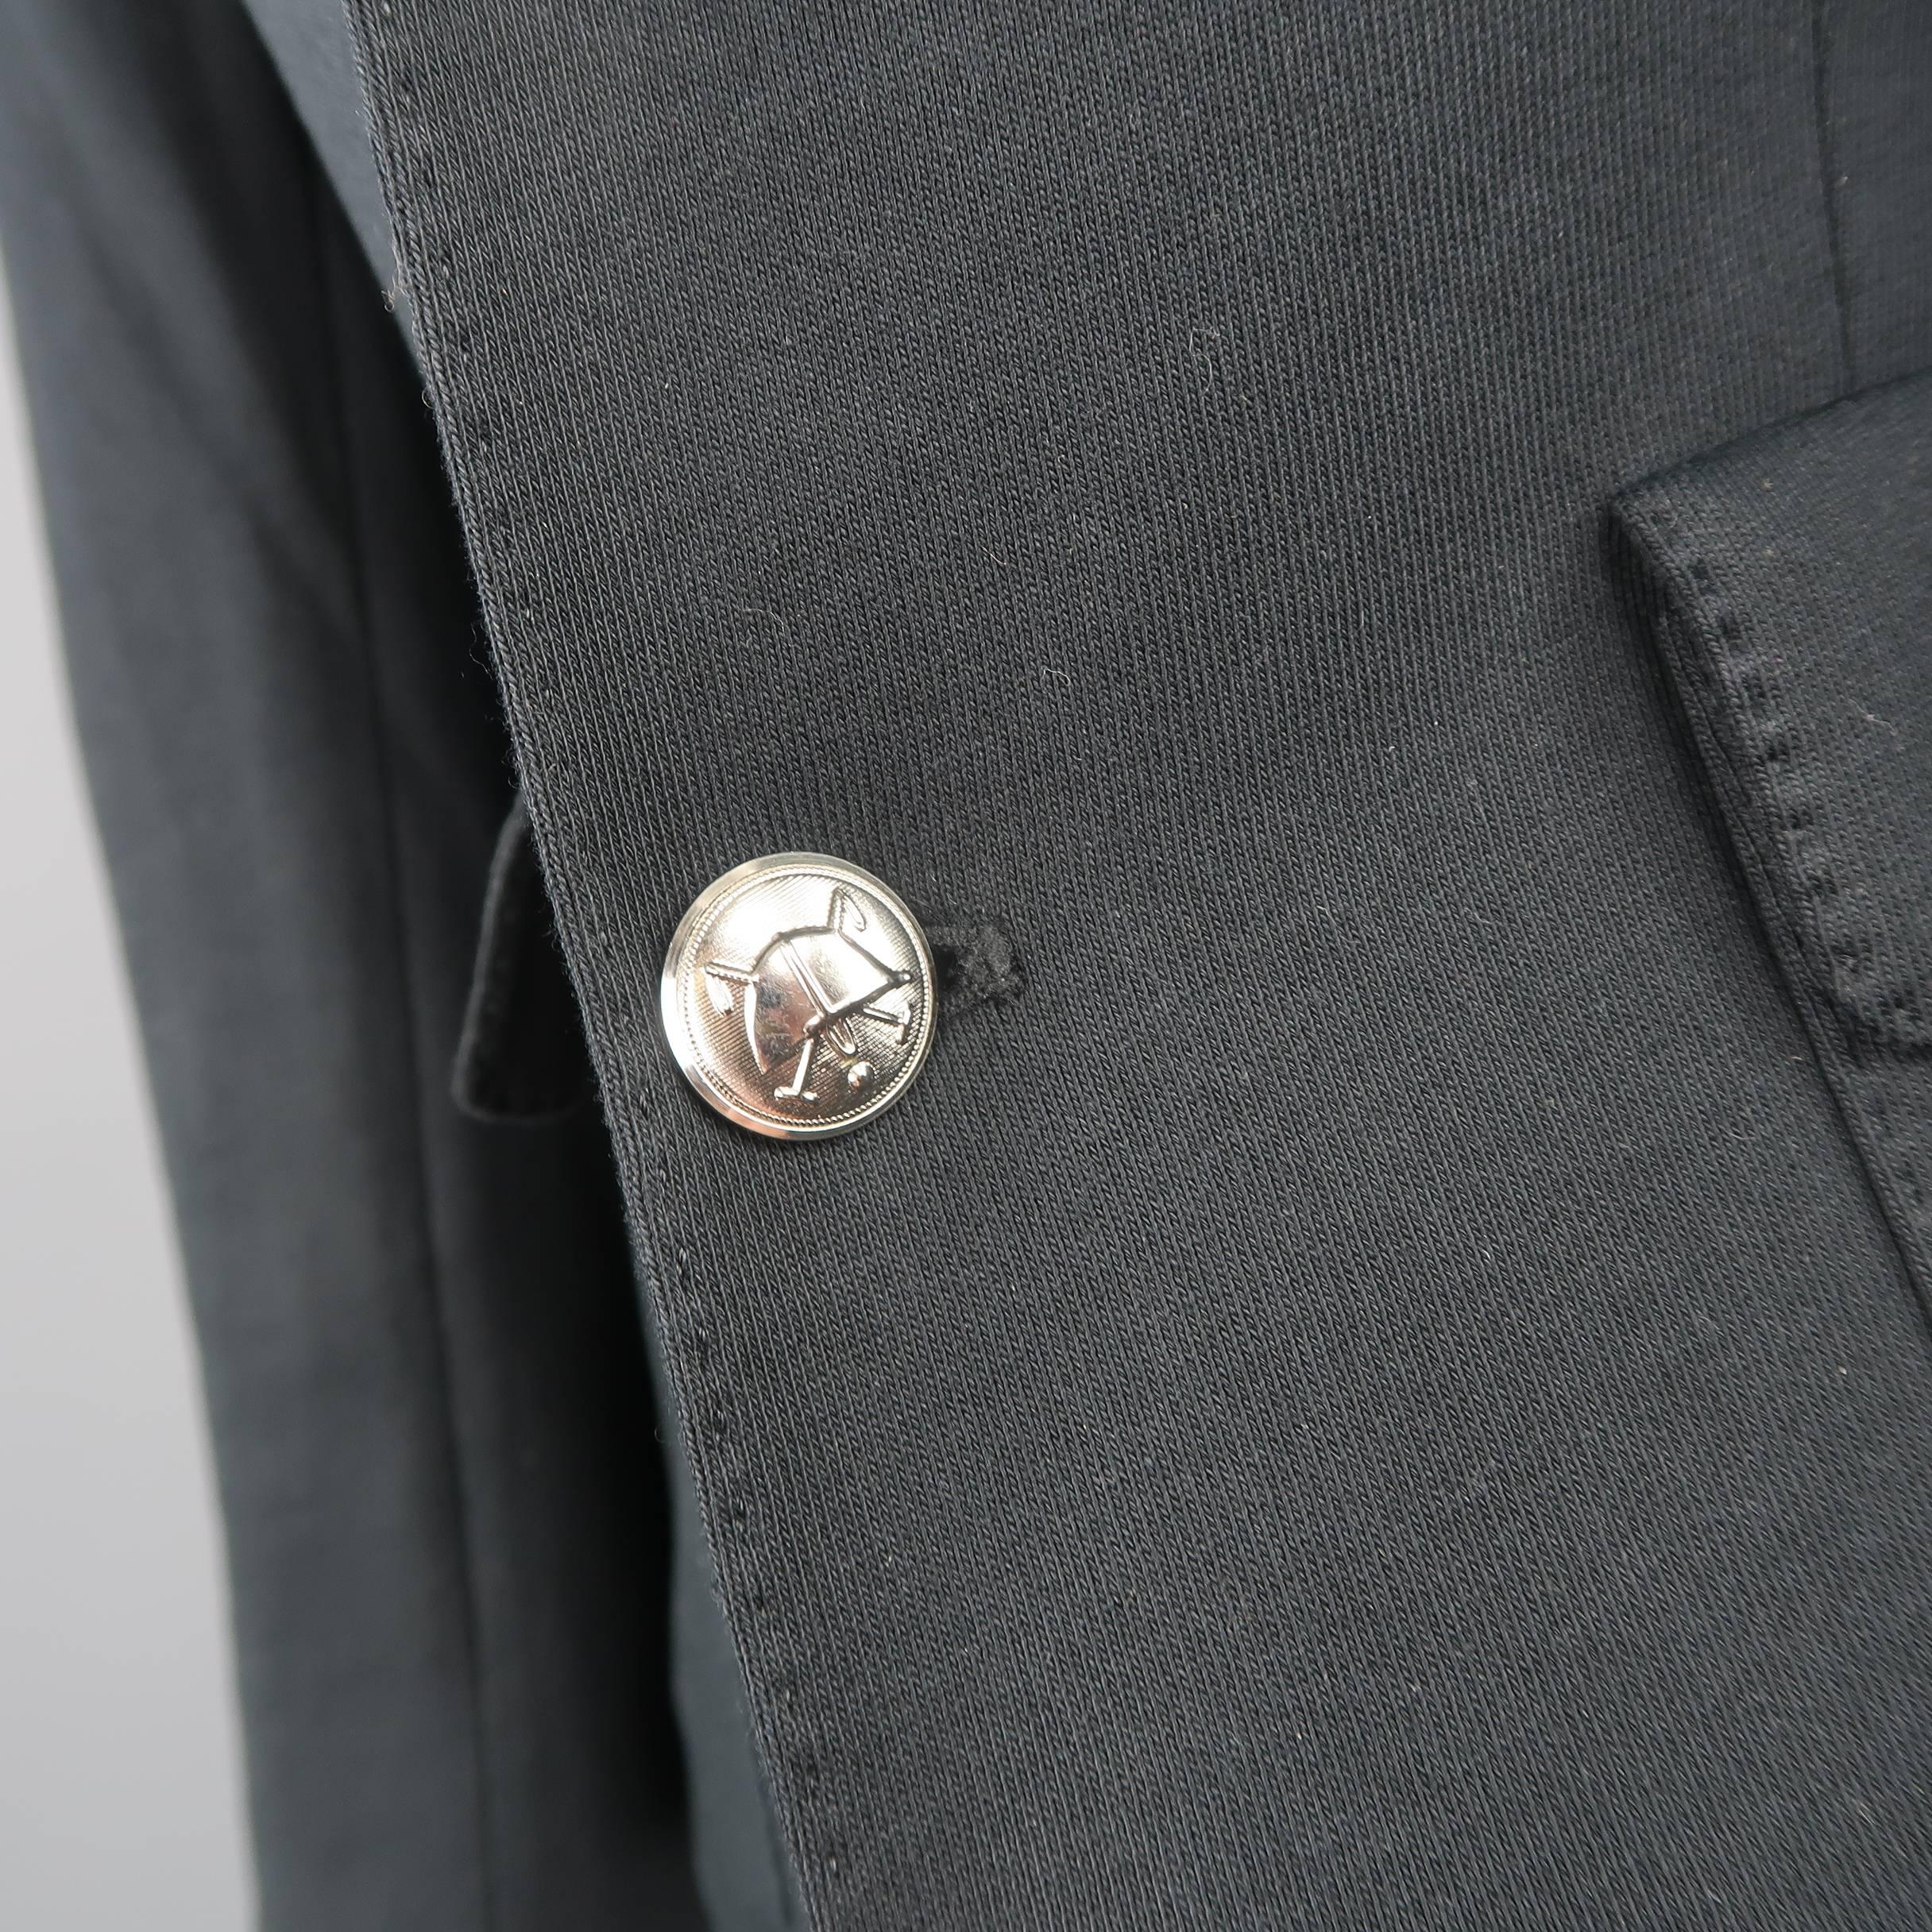 RALPH LAUREN blazer comes in a black cotton jersey and features a notch lapel with top stitching, double patch flap pockets, silver tone engraved buttons, faux button cuffs, and RL coat of arms metallic embroidered breast pocket.
 
Good Pre-Owned